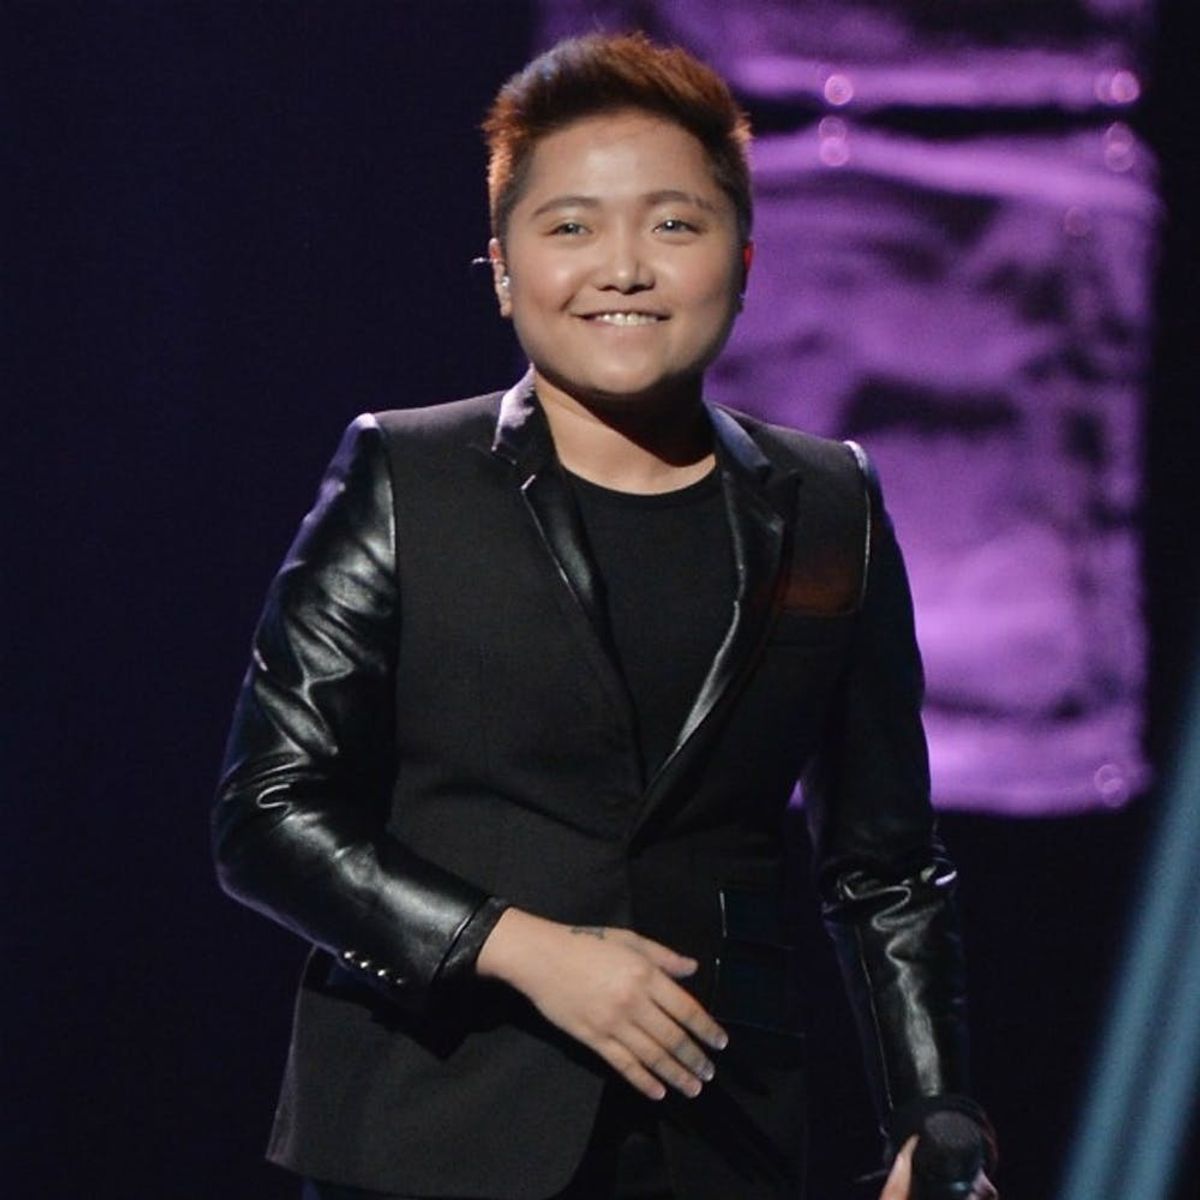 This Is How Former Glee Star Jake Zyrus Transitioned While Staying True to Himself